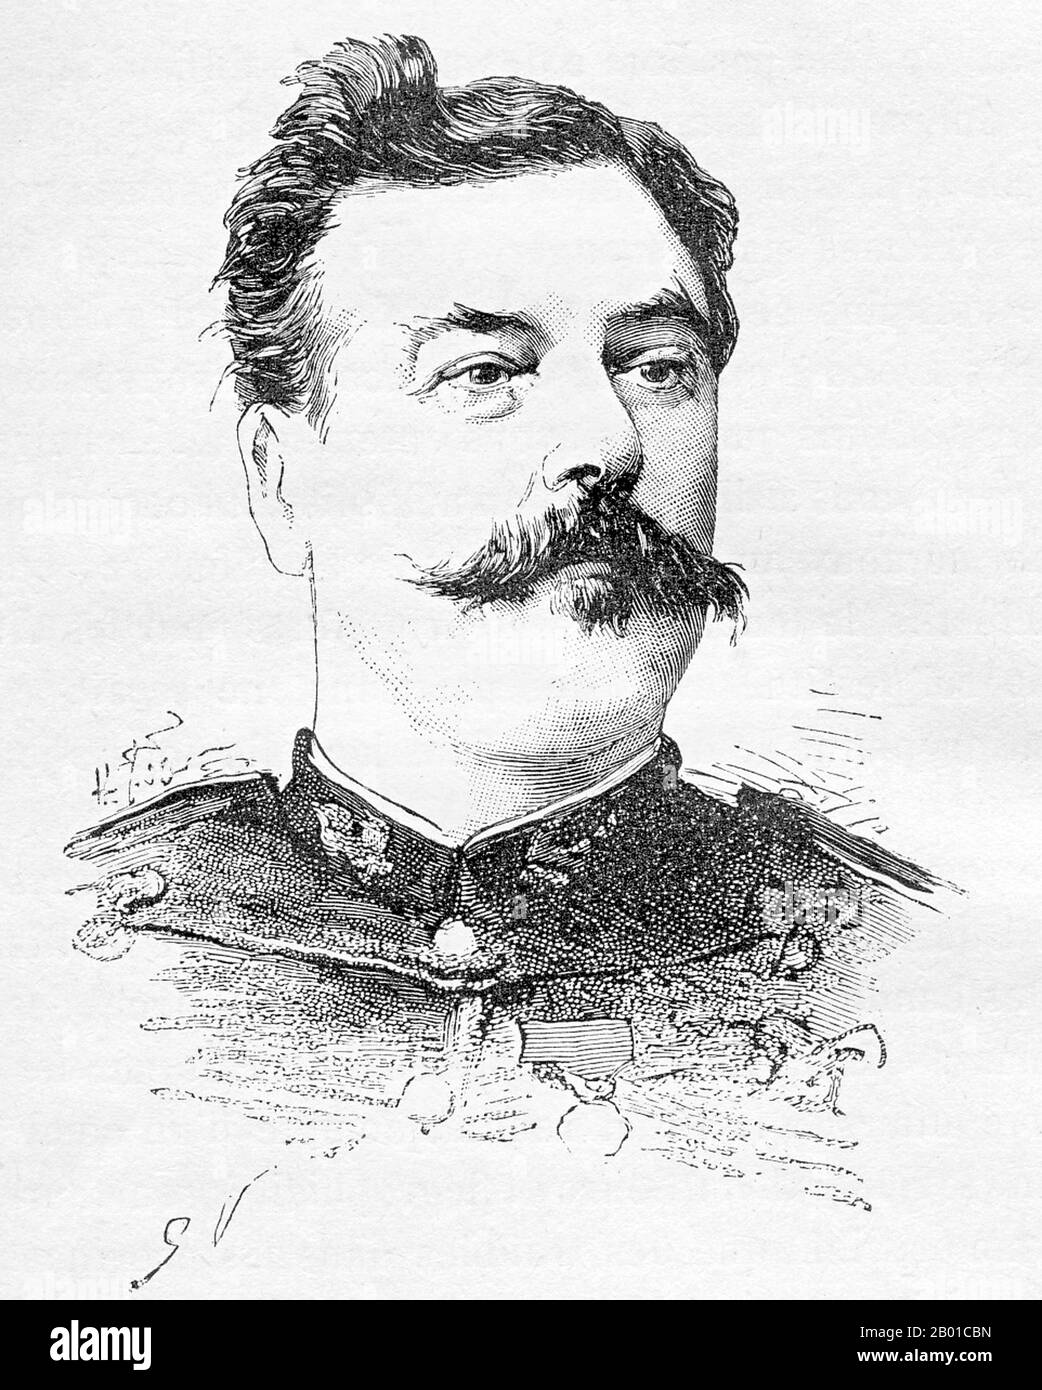 France/Vietnam: Captain Tailland, a marine infantry officer who distinguished himself at the Battle of Nui Bop, 4 January 1885, and was killed at the Battle of Hoa Moc, 2 March 1885. Lithograph portrait by Charles-Lucien Huard (12 February 1837 - 22 January 1899), 1887.  The Tonkin Campaign (French: Campagne du Tonkin) was an armed conflict fought between June 1883 and April 1886 by the French against, variously, the Vietnamese, Liu Yongfu's Black Flag Army and the Chinese Guangxi and Yunnan armies to occupy Tonkin (northern Vietnam) and entrench a French protectorate there. Stock Photo